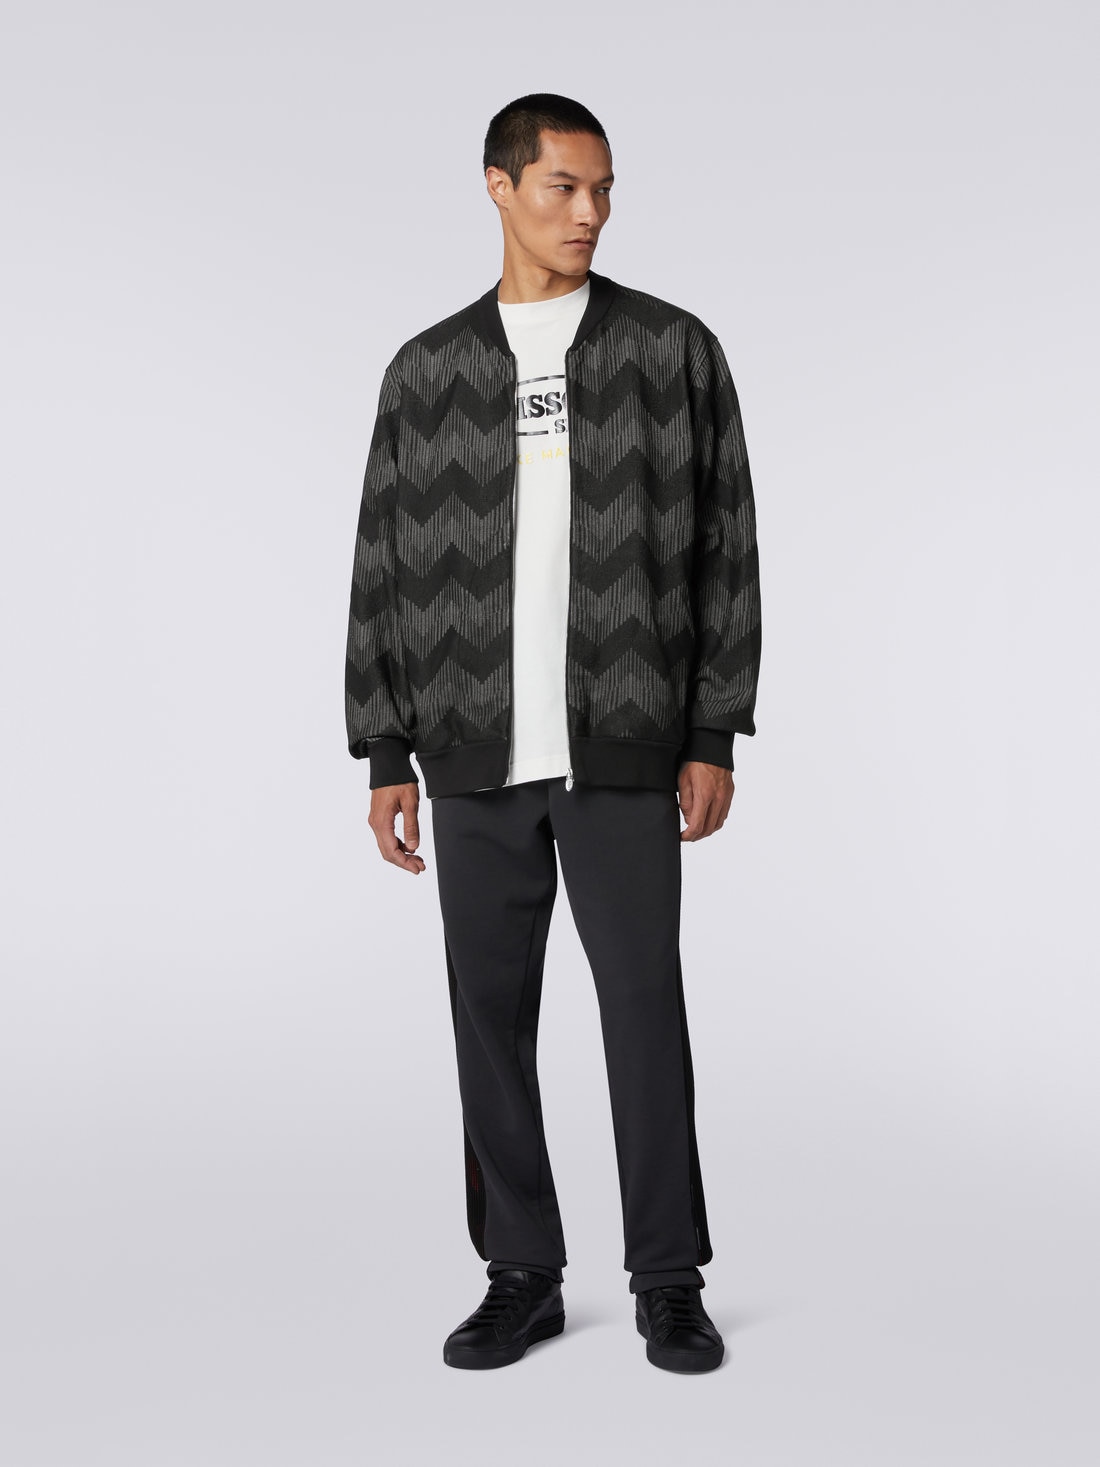 Cotton blend zigzag bomber jacket in collaboration with Mike Maignan, Black & White - TS23SC04BK031NS91IB - 1